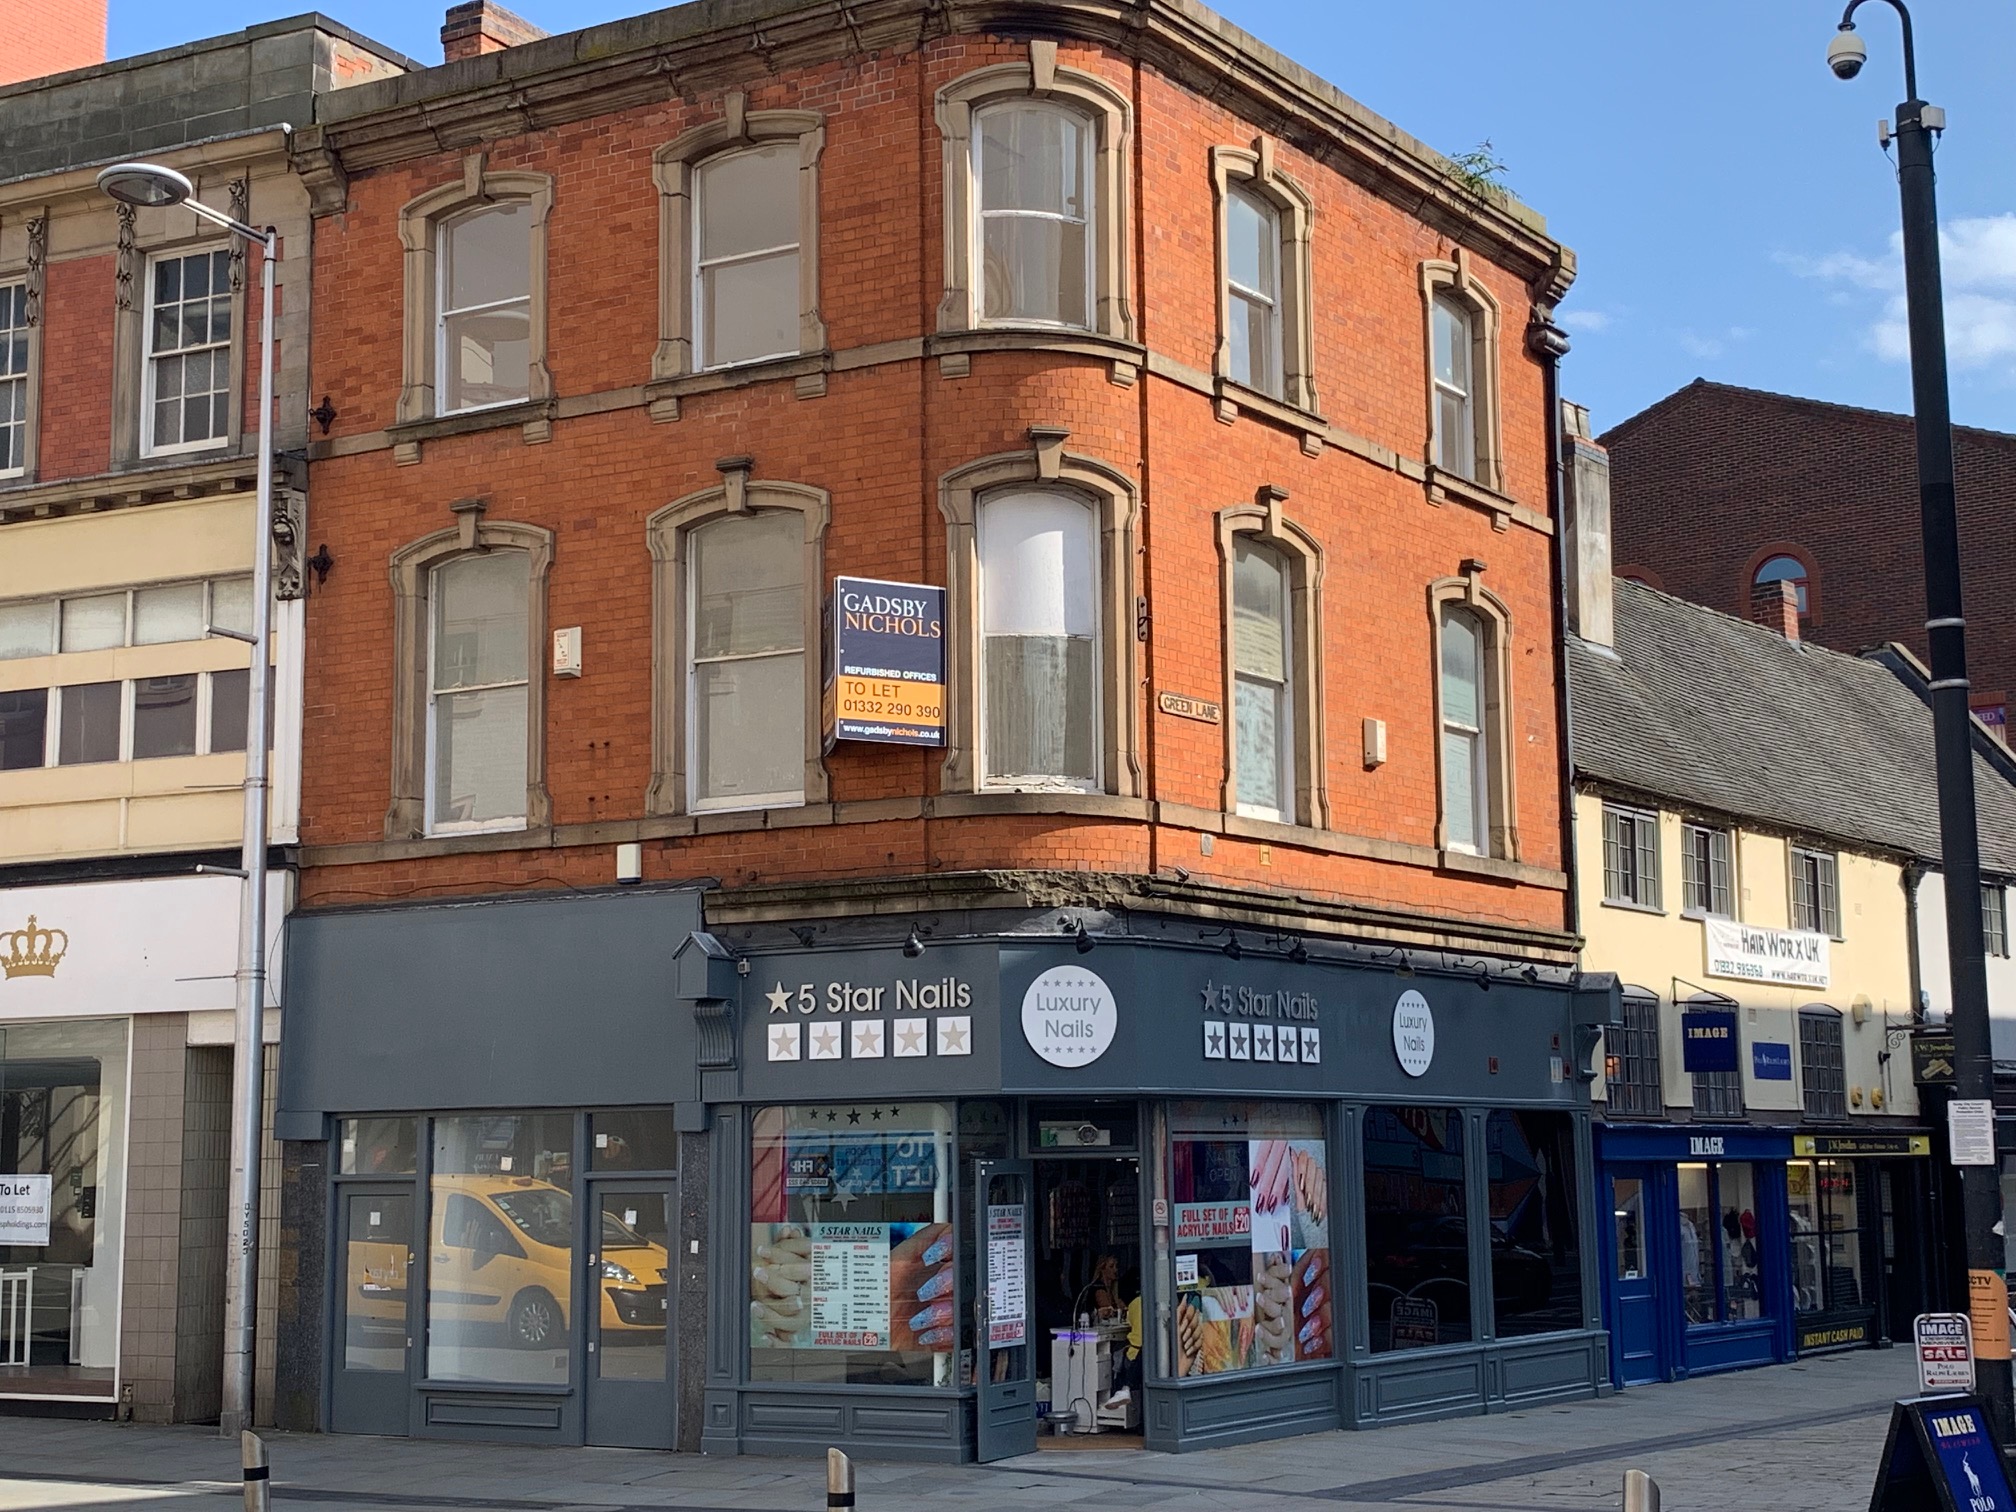 Retail Property (High Street) for rent in Derby. From Gadsby Nichols - Derby